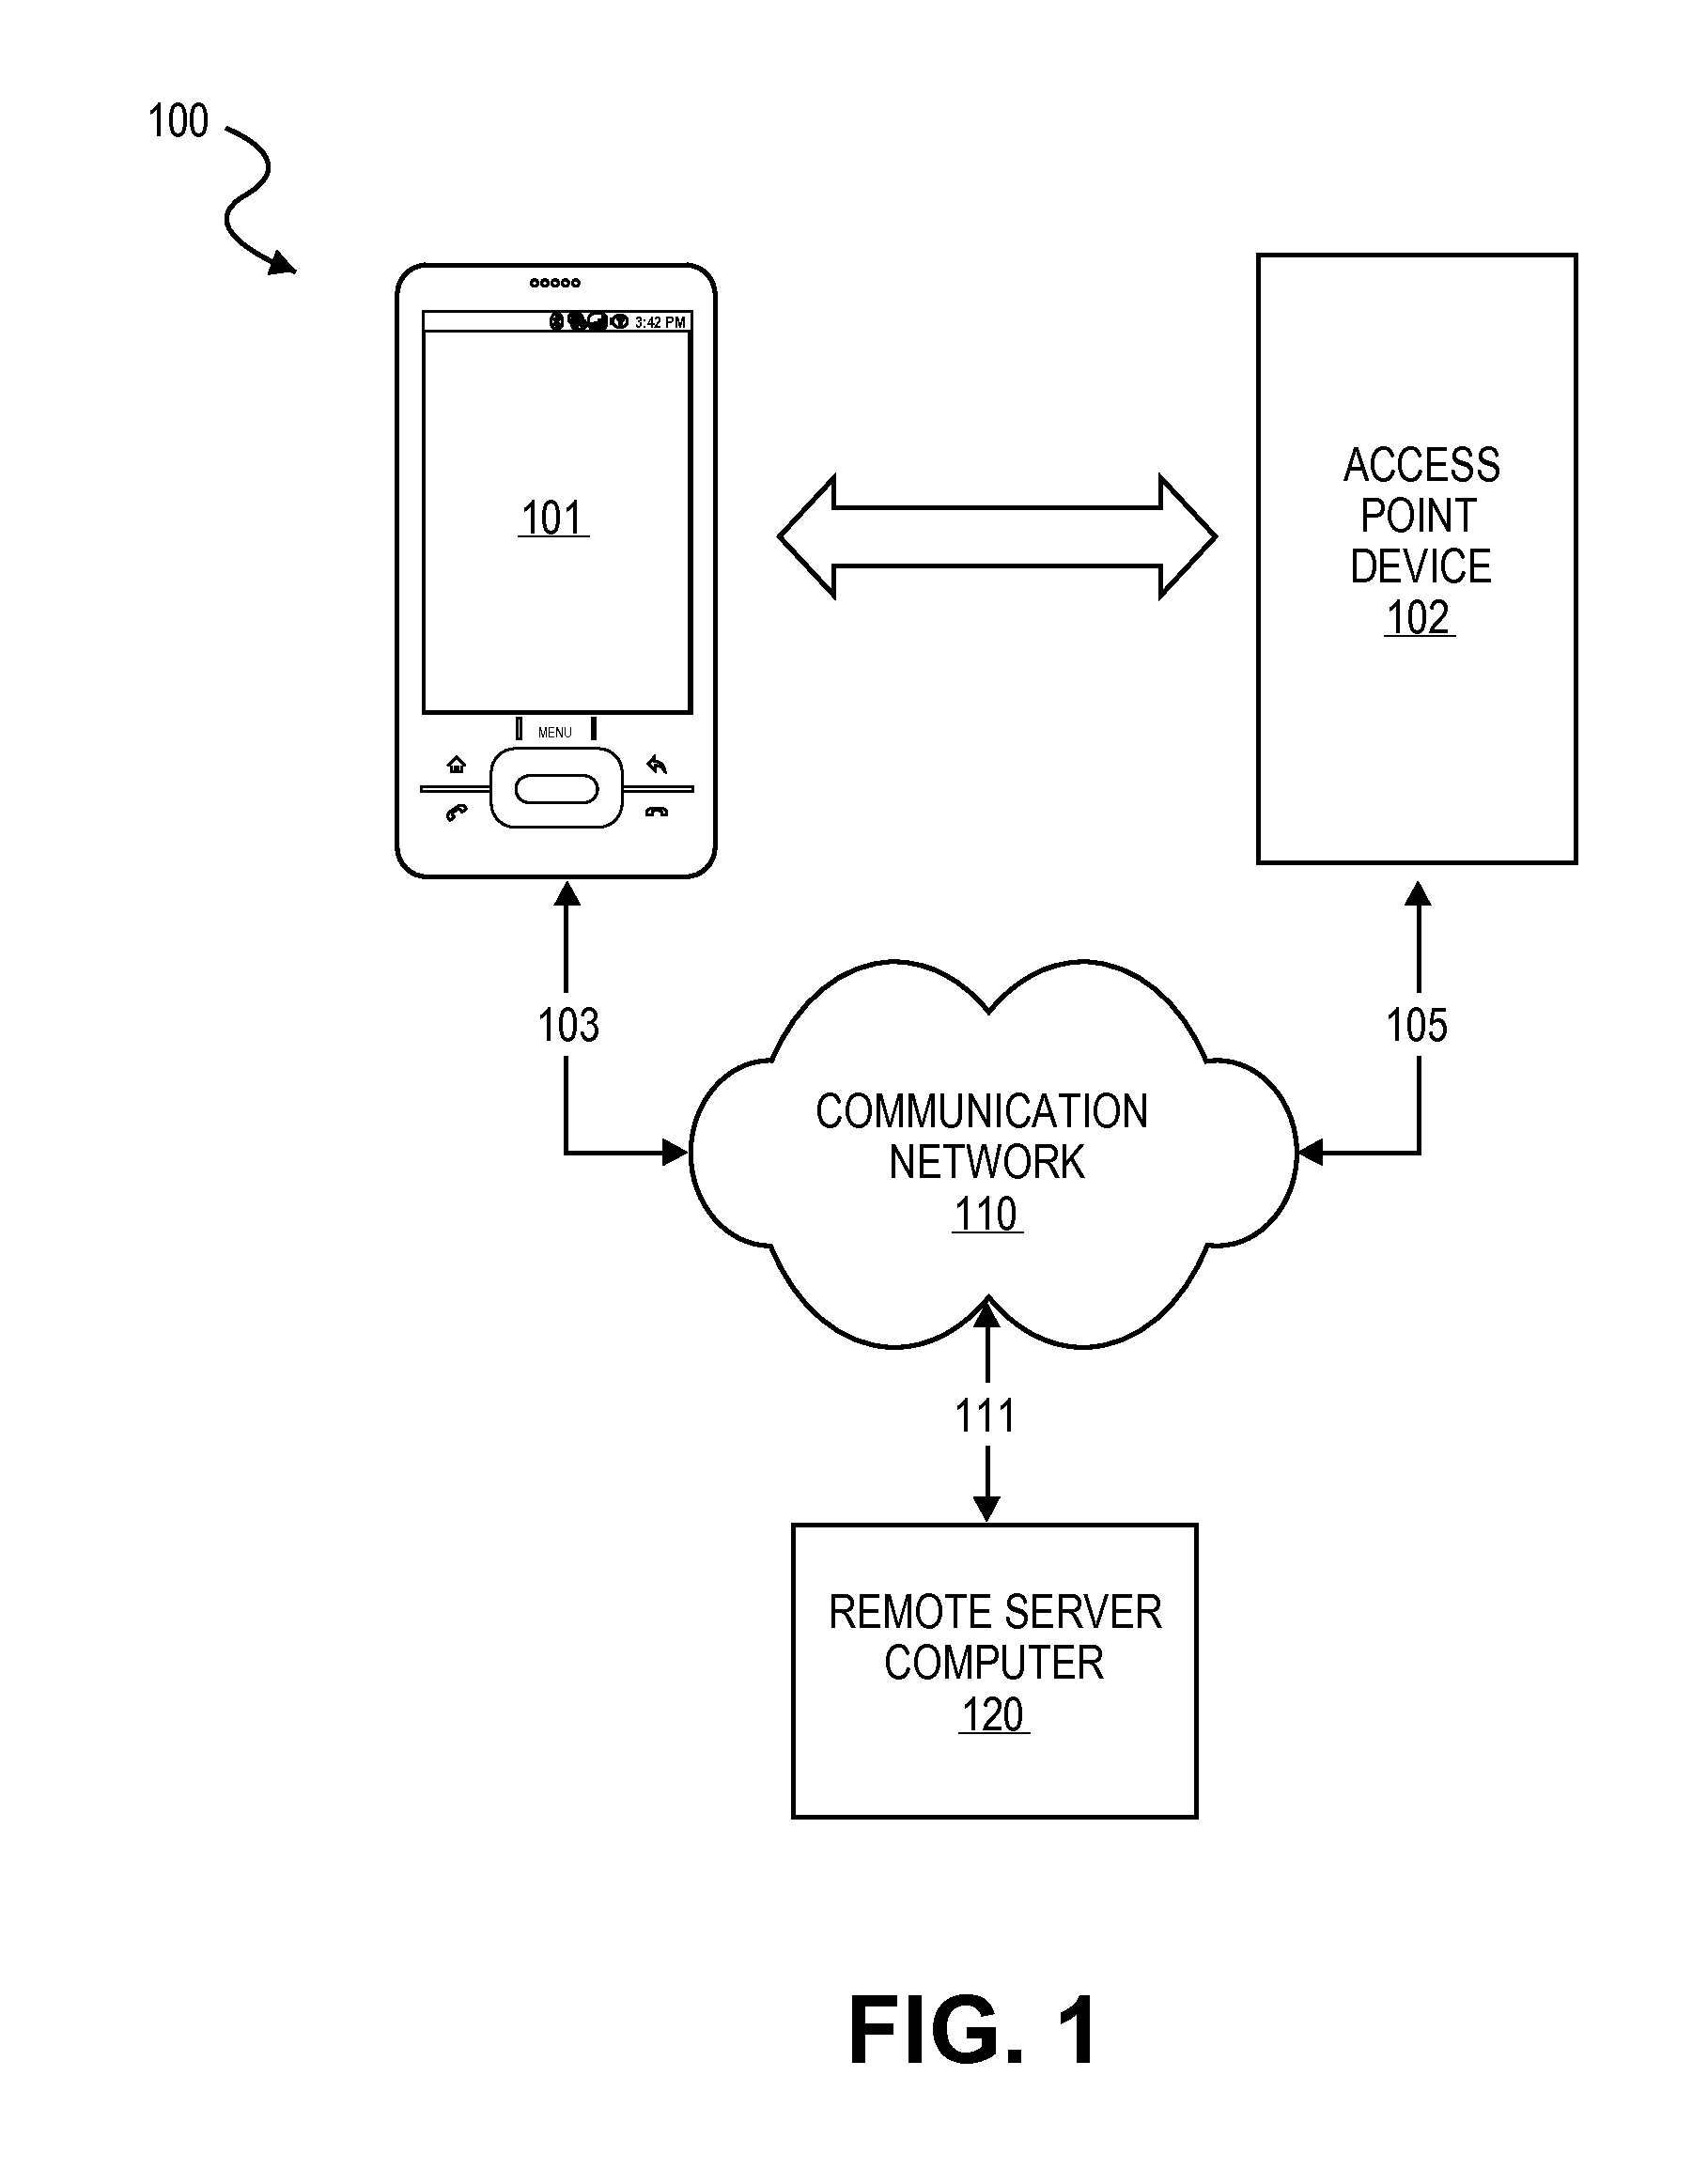 Access Using a Mobile Device with an Accelerometer